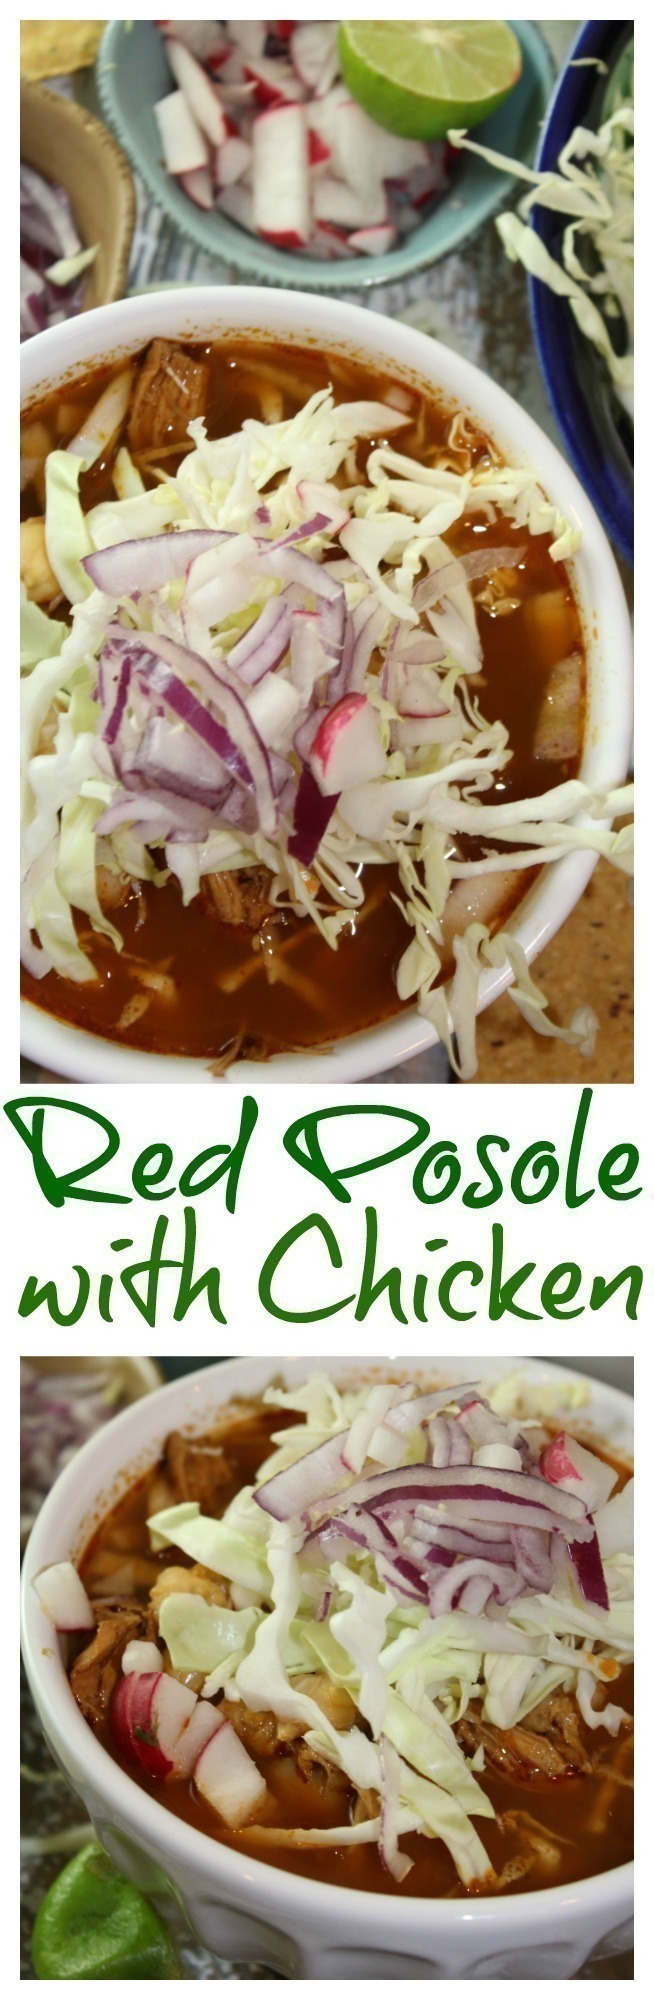 This Mexican stew features chiles and hominy, in a rich flavorsome broth. Dress up the stew with radishes, onions and sliced cabbage. It's traditional to serve the chicken in whole pieces but you can also pull it off the bone for even greater flavor.